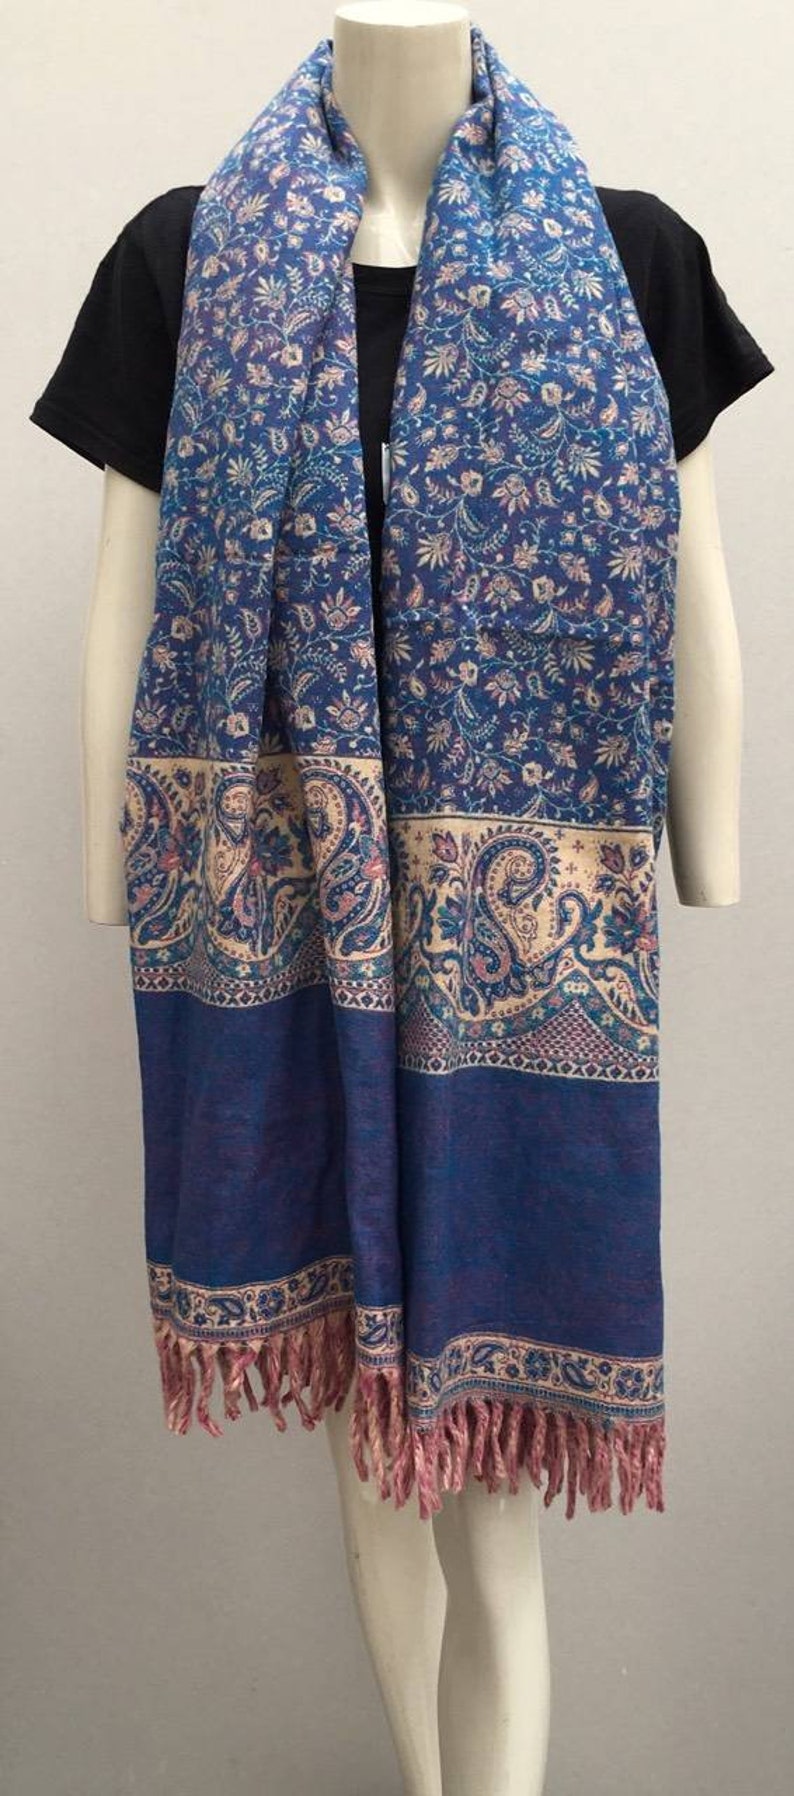 Real yak wool shawl/himalayan made purple,blue/beige COLOUR paisley floral print ethnic DOUBLE sided scarf/wrap/blanket,High quality gift zdjęcie 2